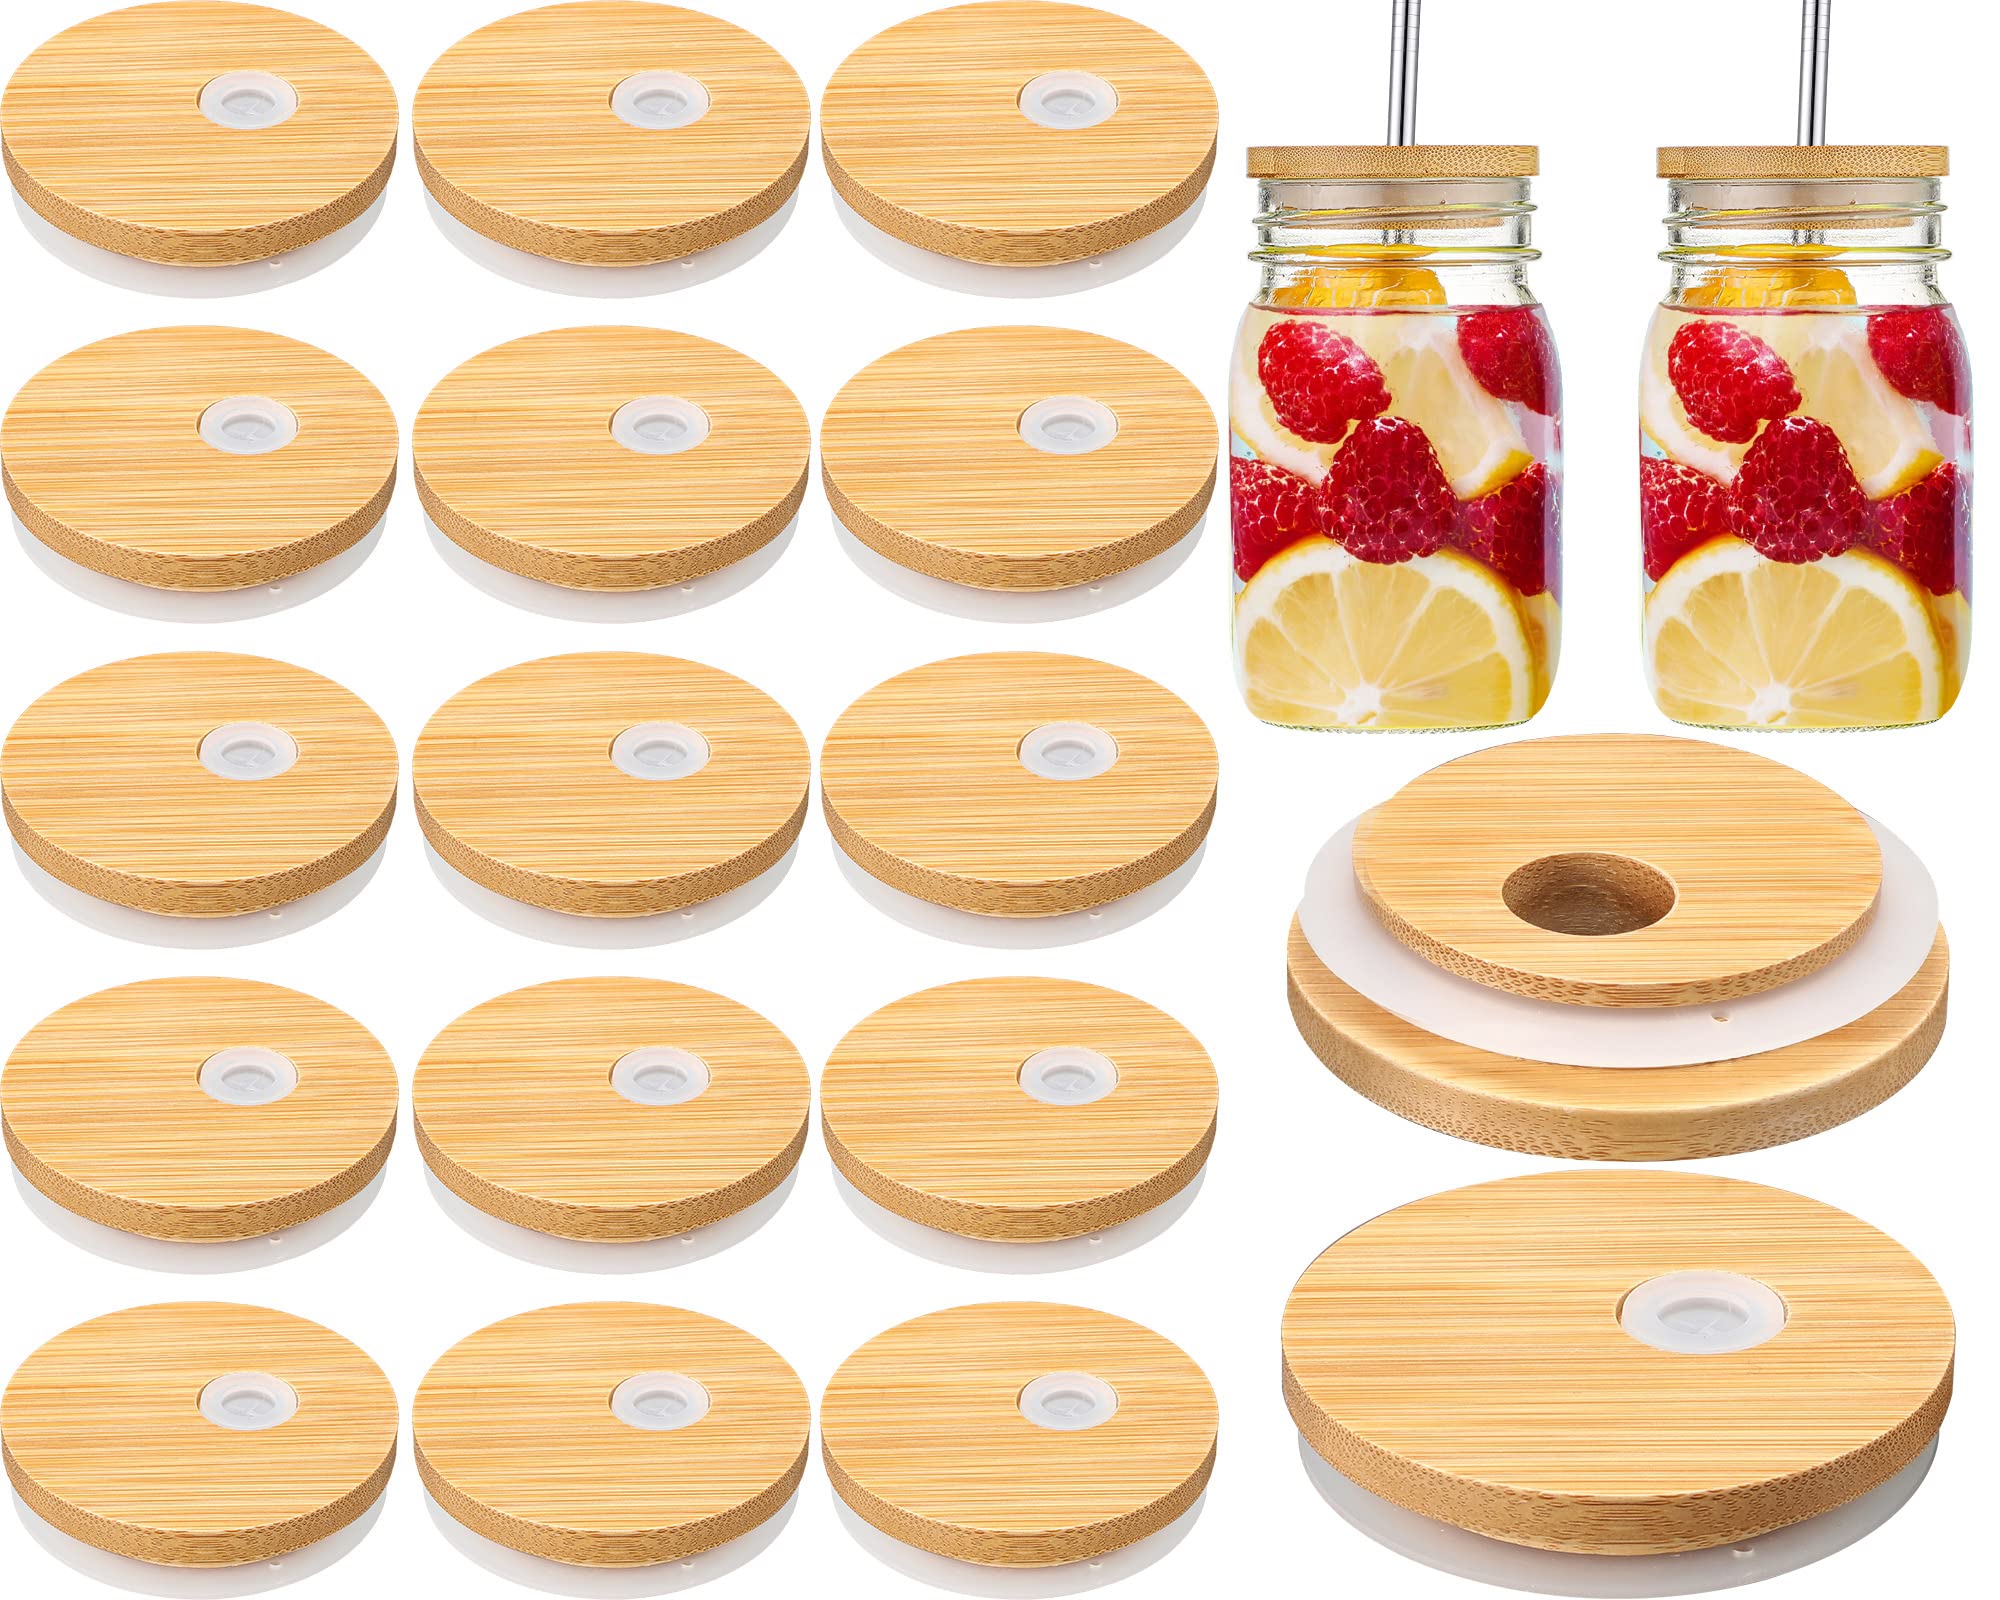 Sieral 70mm Bamboo Jar Lids with Straw Hole for Glass Cups Reusable Wooden Mason Jar Lids for Beer Can Cups 2.76inch Canning Lids with Silicone Ring for Regular Mouth Drinking Jars(20 Pcs)